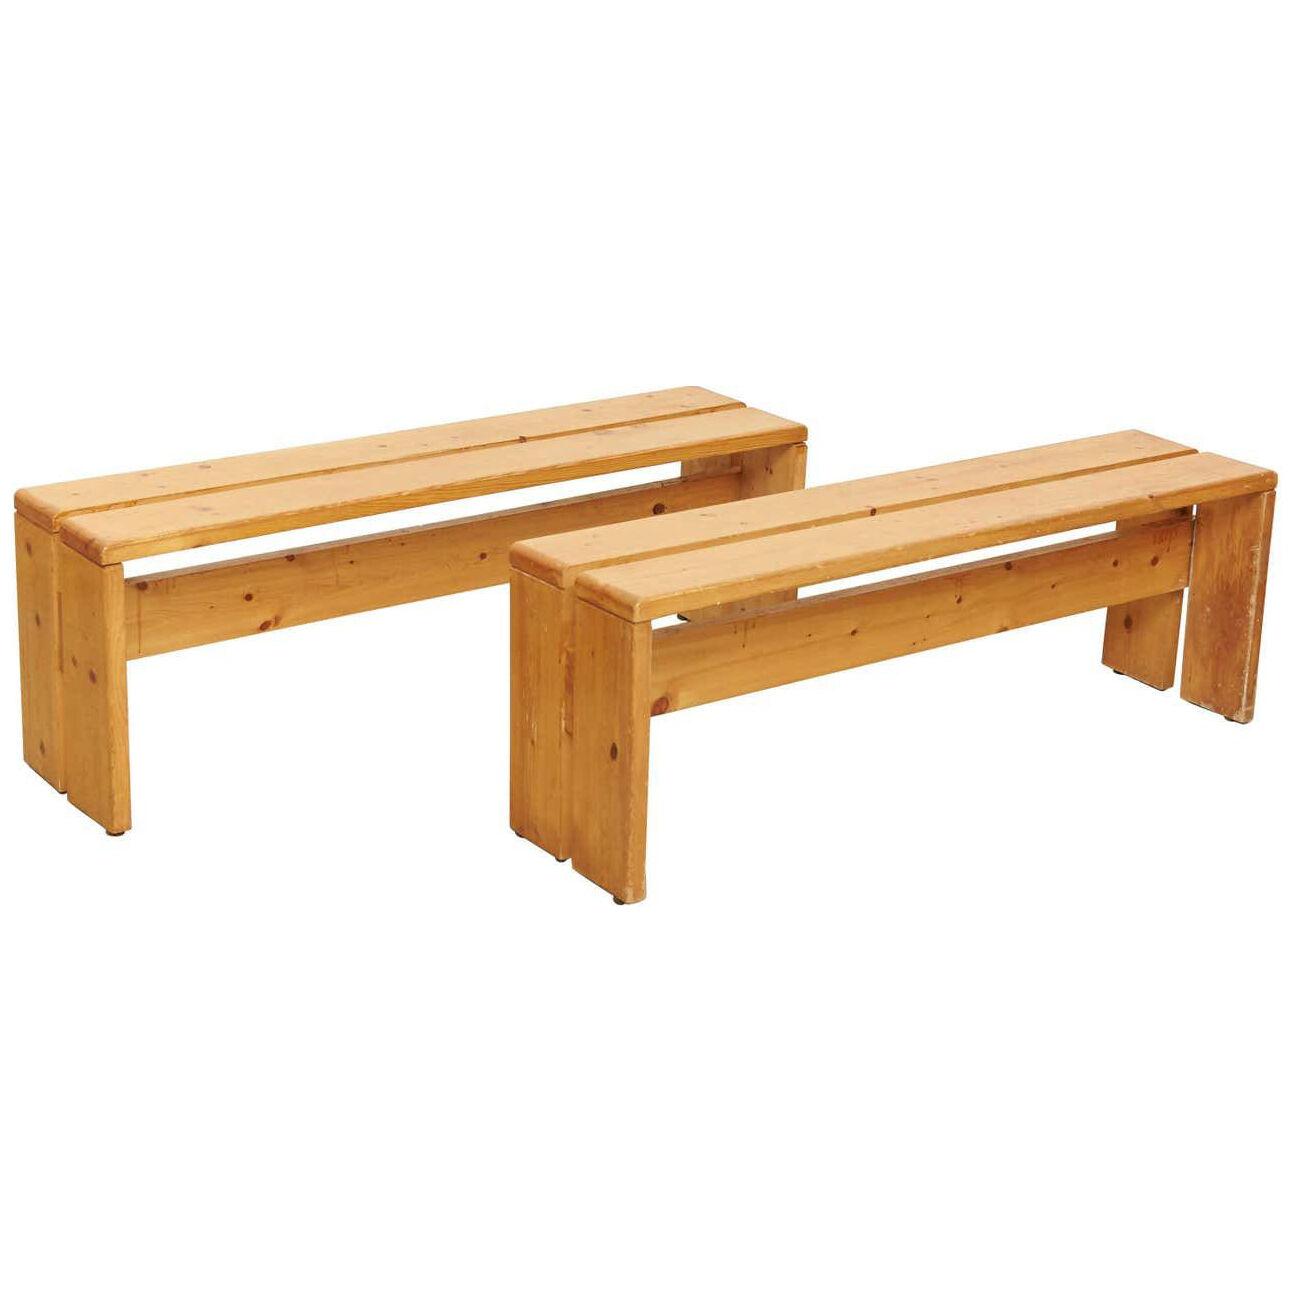 Set of Two Charlotte Perriand Large Wood Benches for Les Arcs, circa 1960